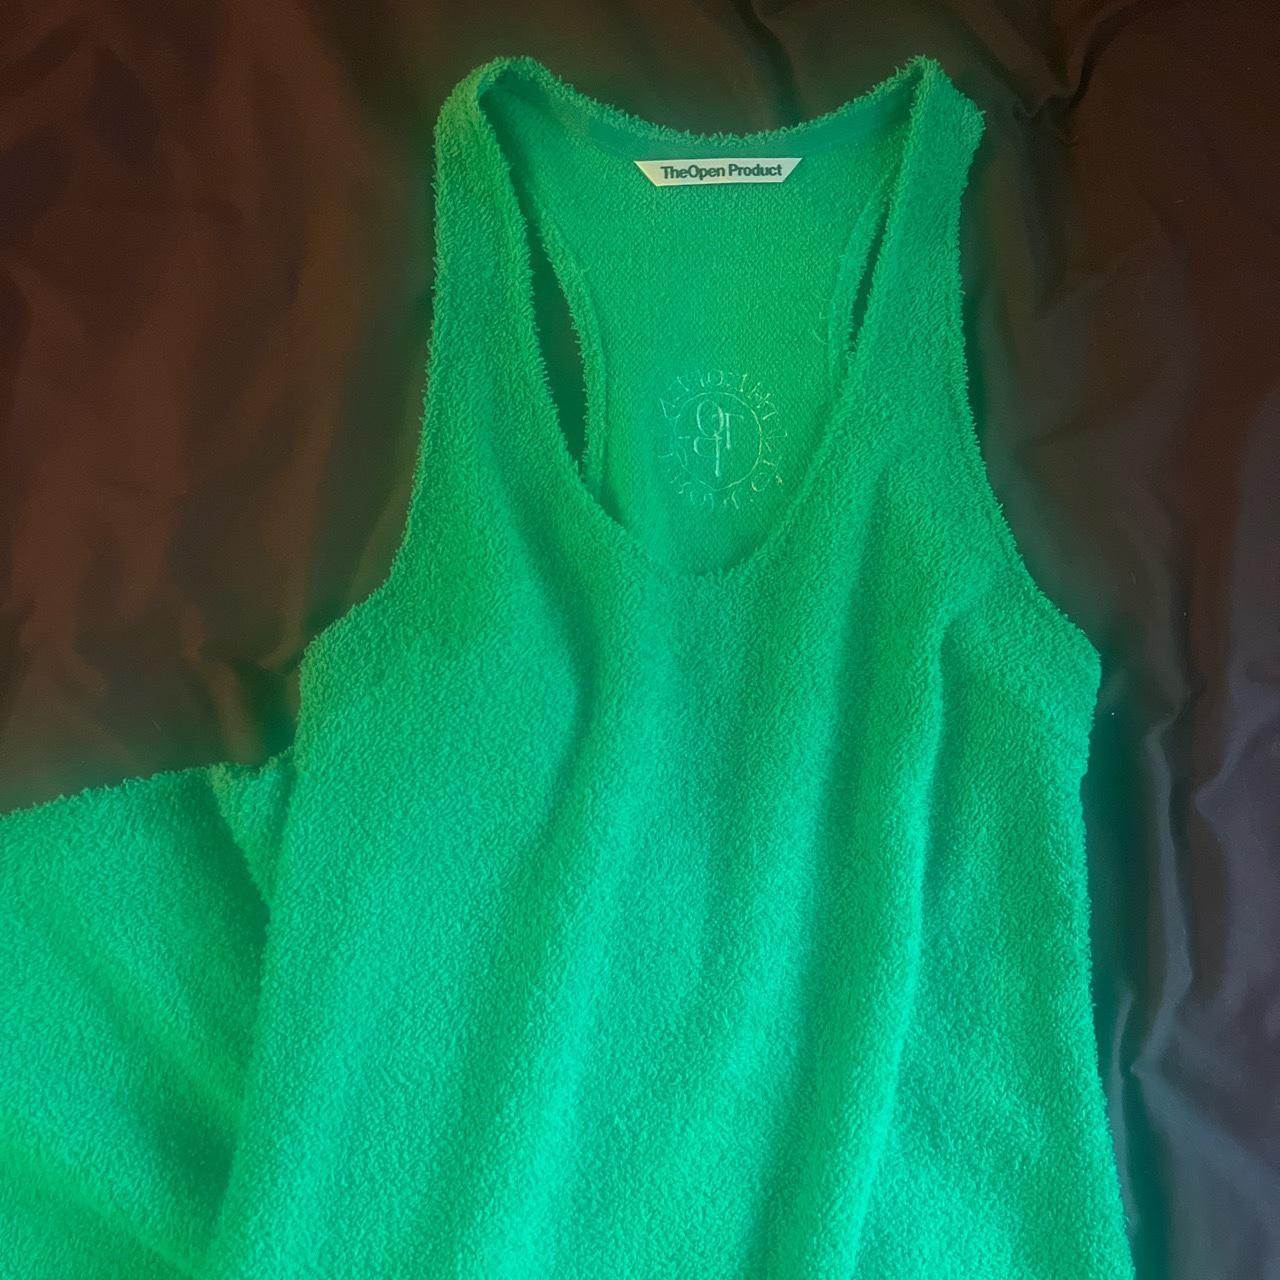 TheOpen Product green terry dress :) as seen on - Depop